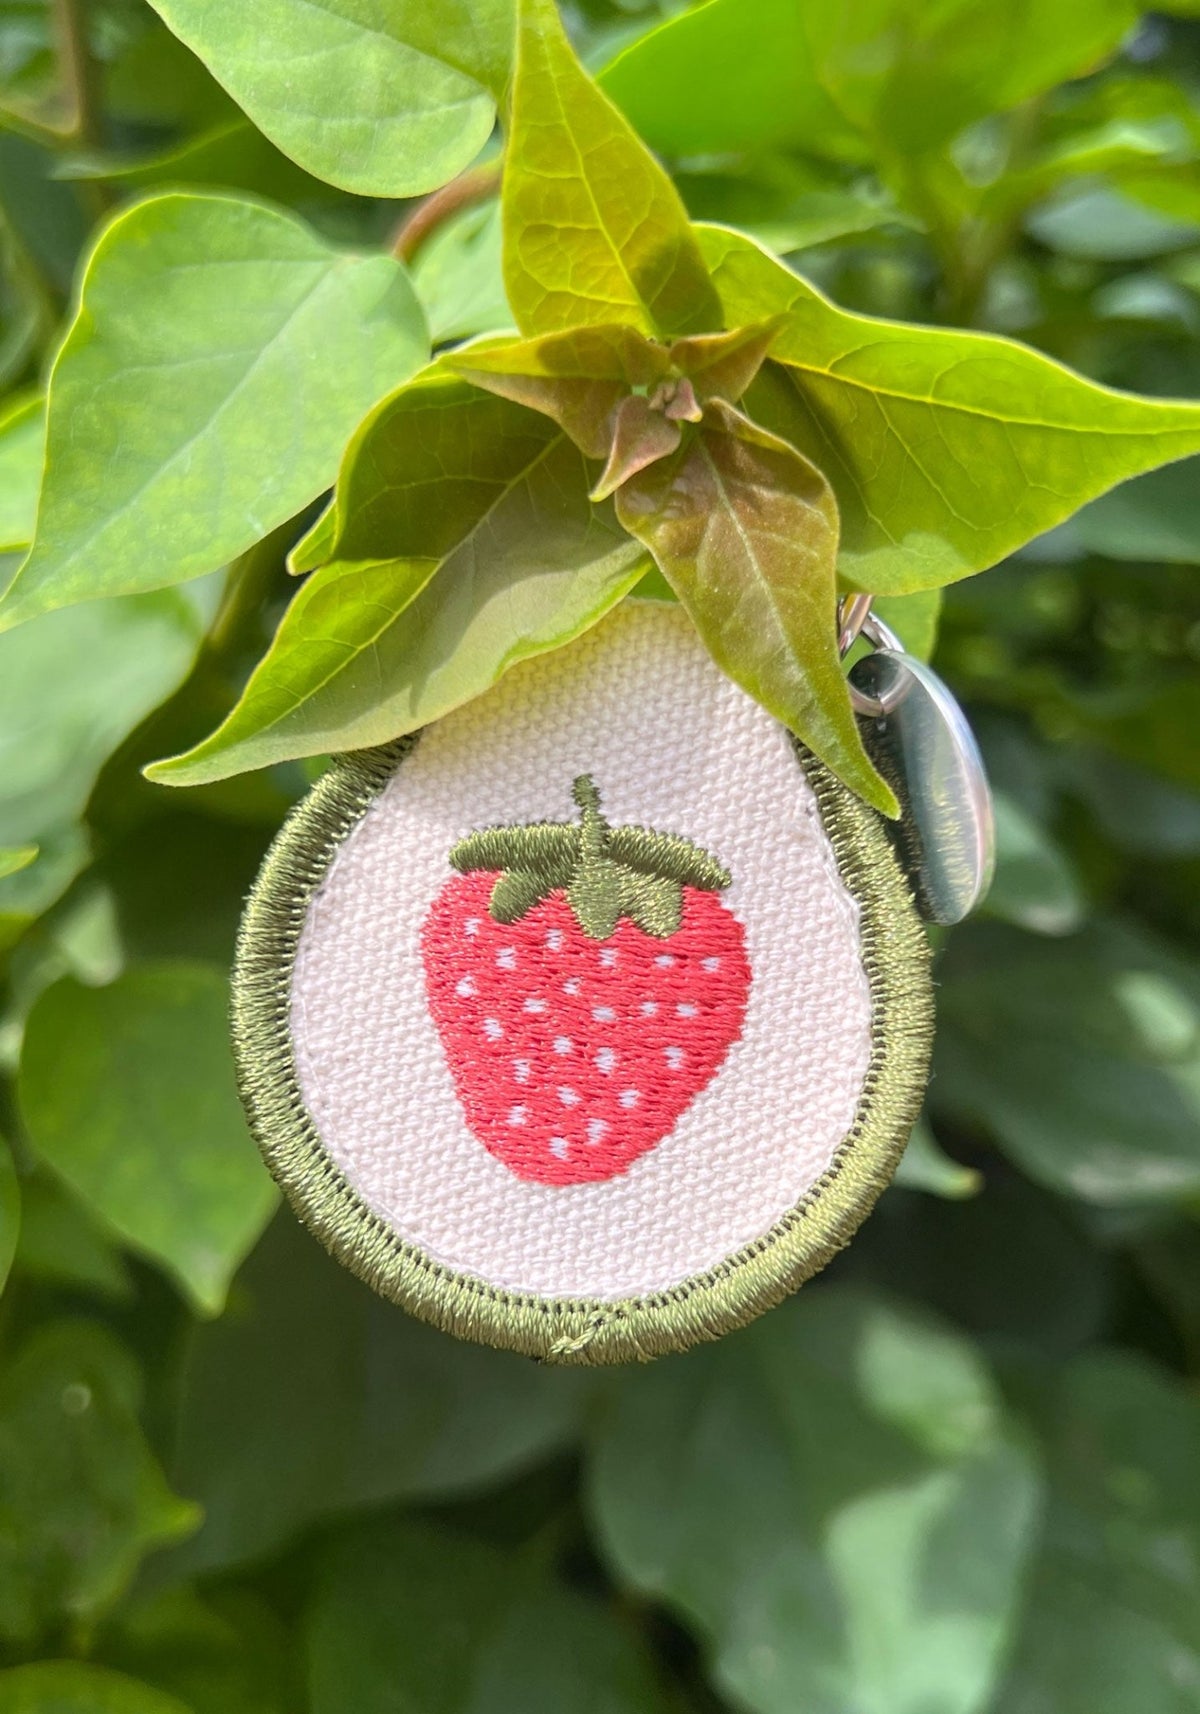 Strawberry Patch Keychain by Three Potato Four embroidery fruit fruits